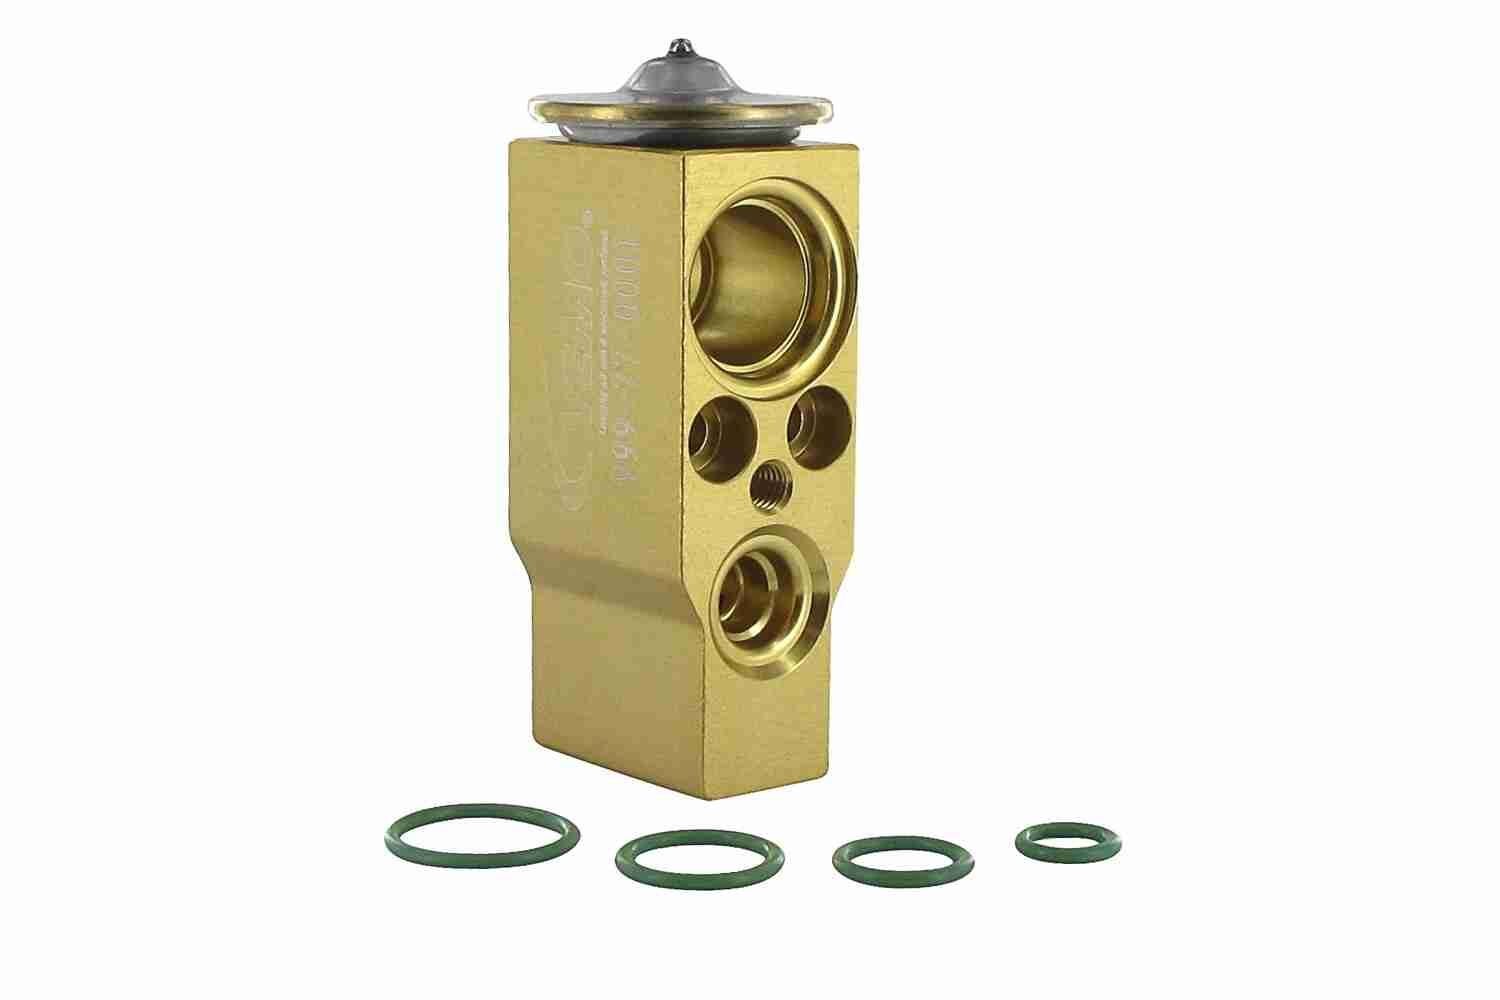 Opel AC expansion valve VEMO V99-77-0001 at a good price